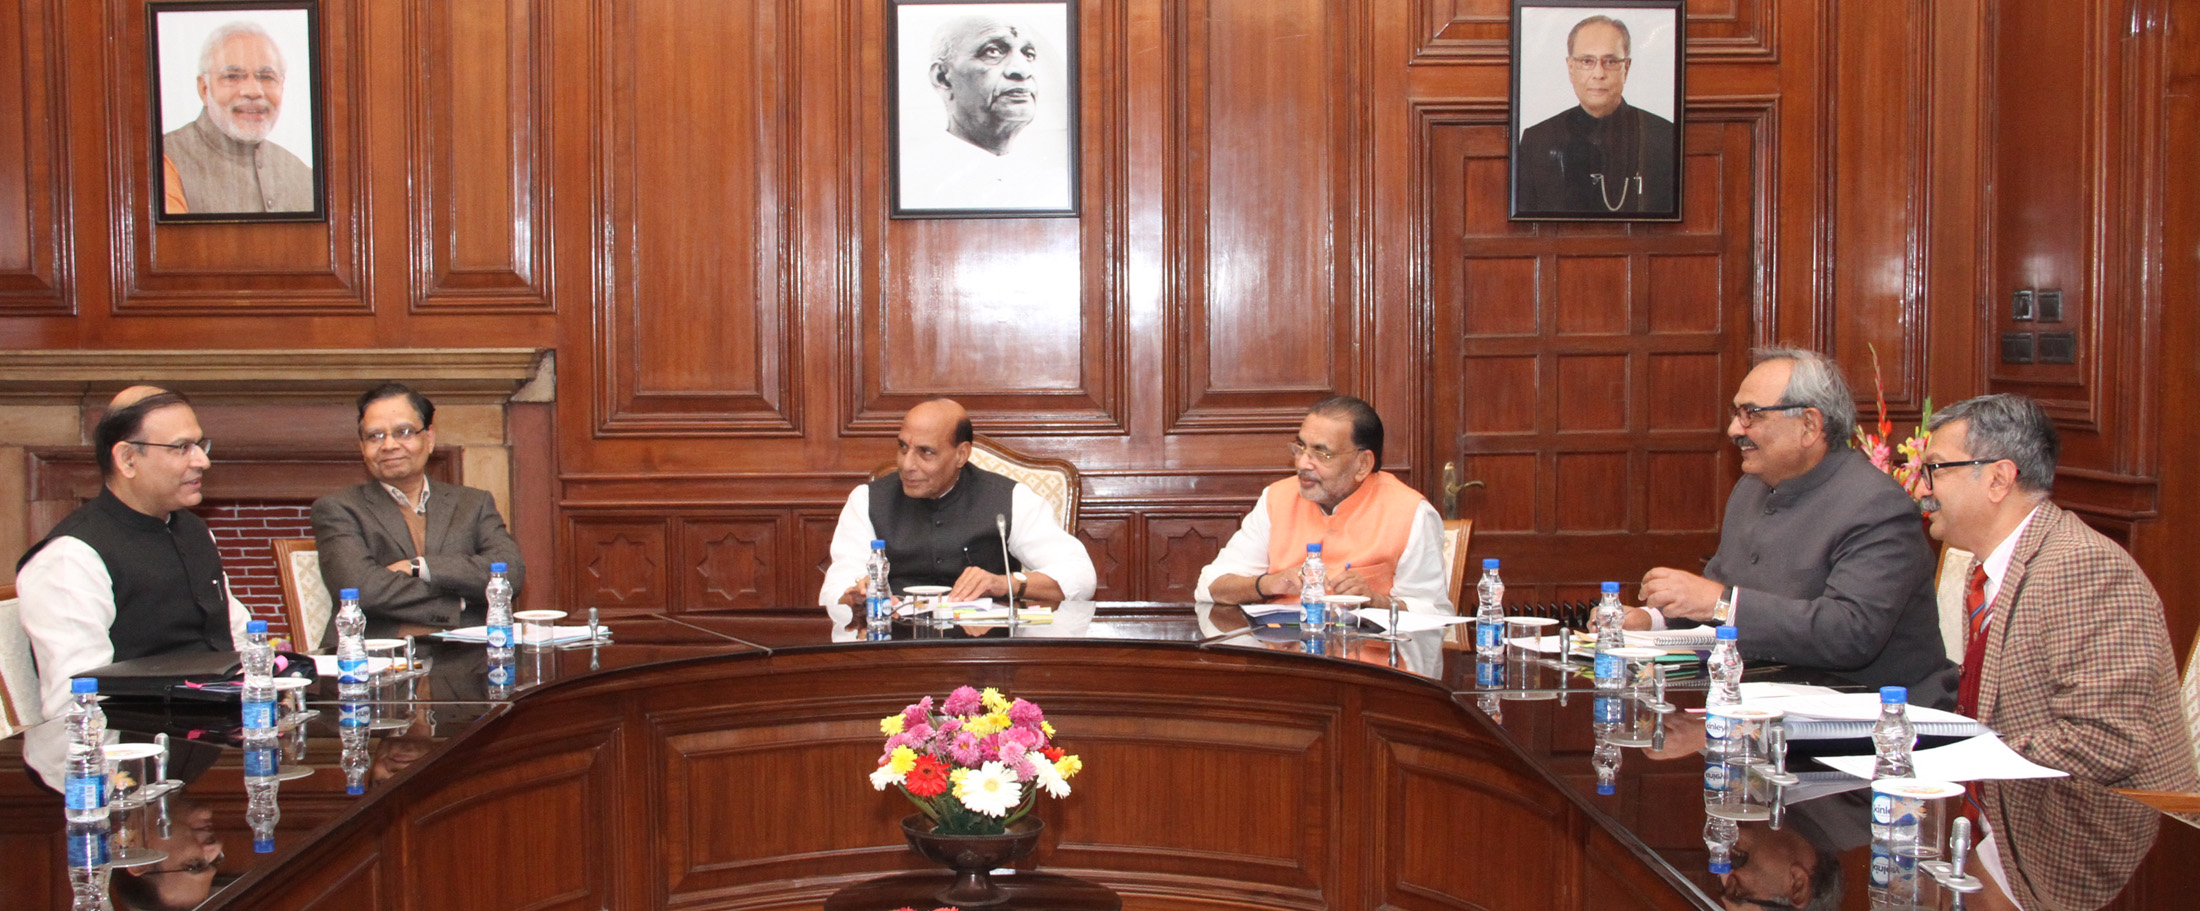 The Union Home Minister, Shri Rajnath Singh chairing a High Level Committee (HLC) meeting for Central Assistance to States affected by drought, in New Delhi on December 29, 2015.  	The Union Minister for Agriculture and Farmers Welfare, Shri Radha Mohan Singh, the Minister of State for Finance, Shri Jayant Sinha, the Vice Chairman NITI Aayog, Shri Arvind Panagariya, the Union Home Secretary, Shri Rajiv Mehrishi and the Additional Secretary, Department of Agriculture, Cooperation & Farmers Welfare, Shri Raghvendra Singh are also seen.